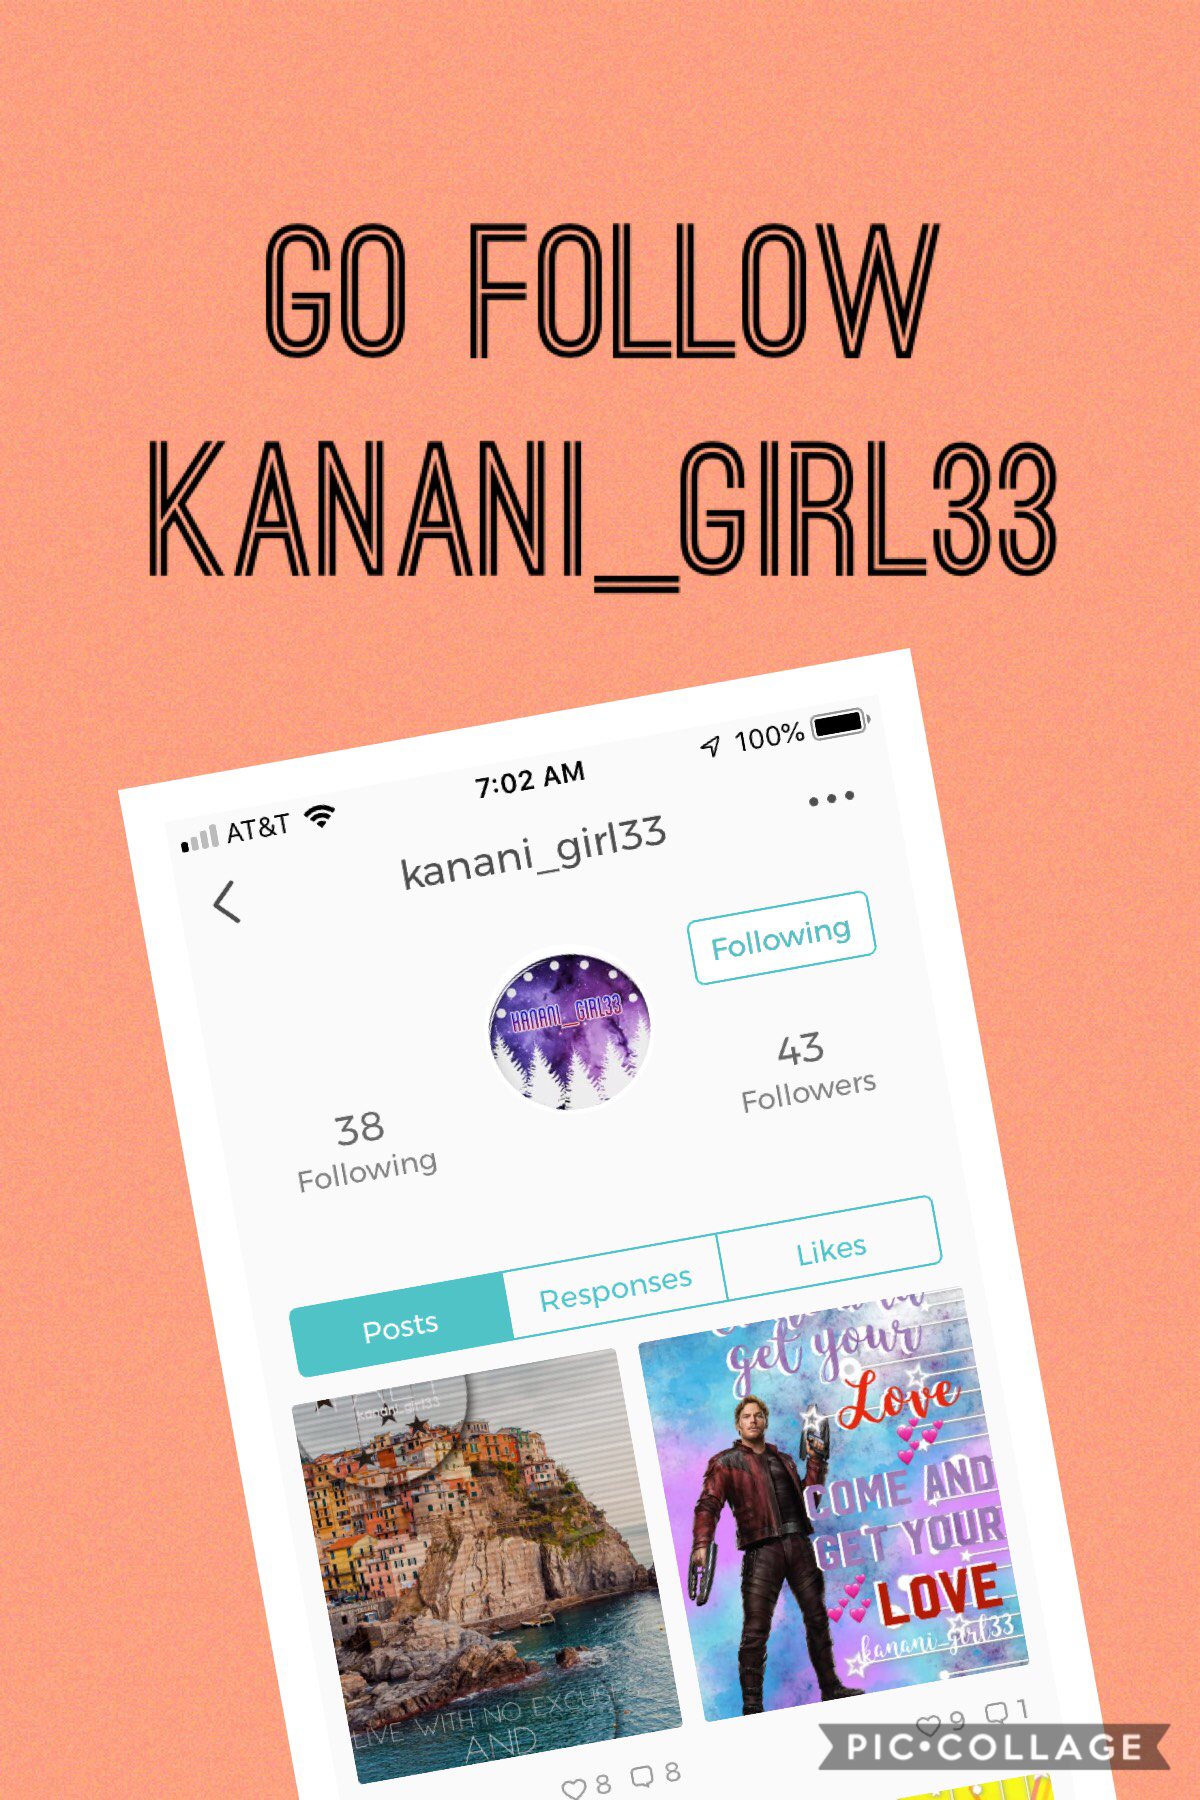 Kanani_girl33 won the Guess me! Contest. Go follow her.